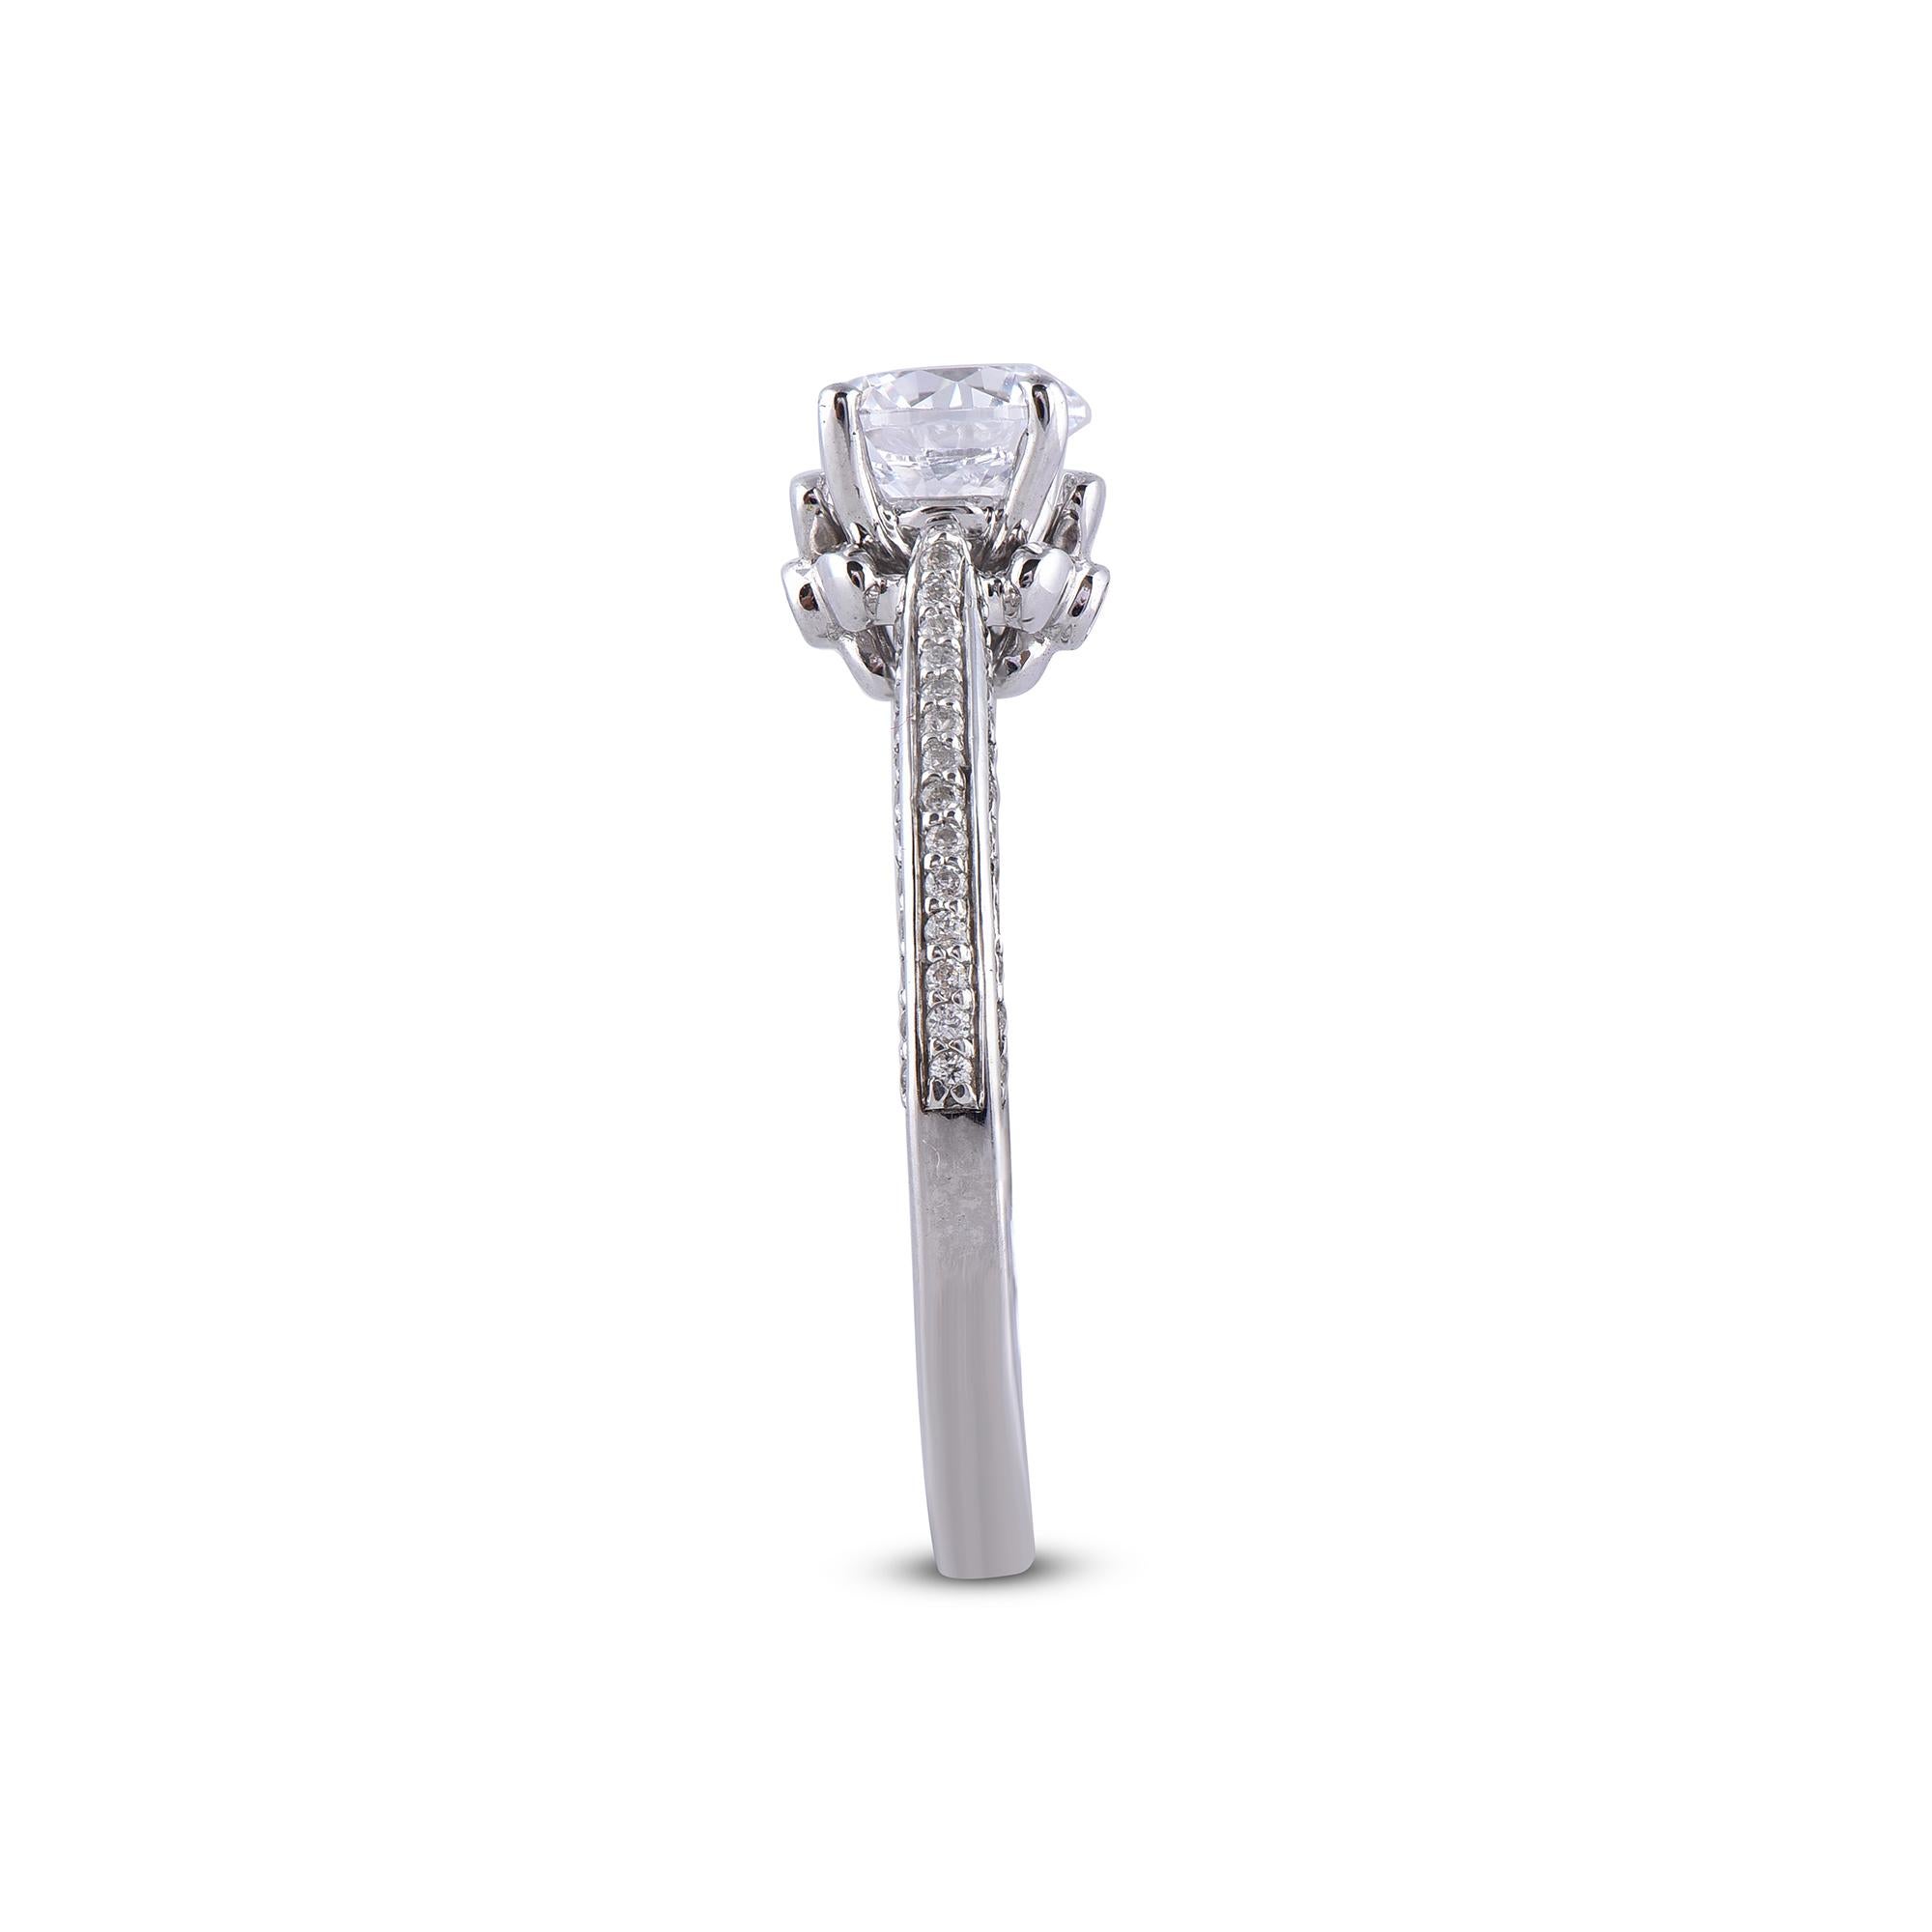 Round Cut TJD 1.00 Carat Round Diamond 18K White Gold Engagement Ring with Shoulder Stones For Sale